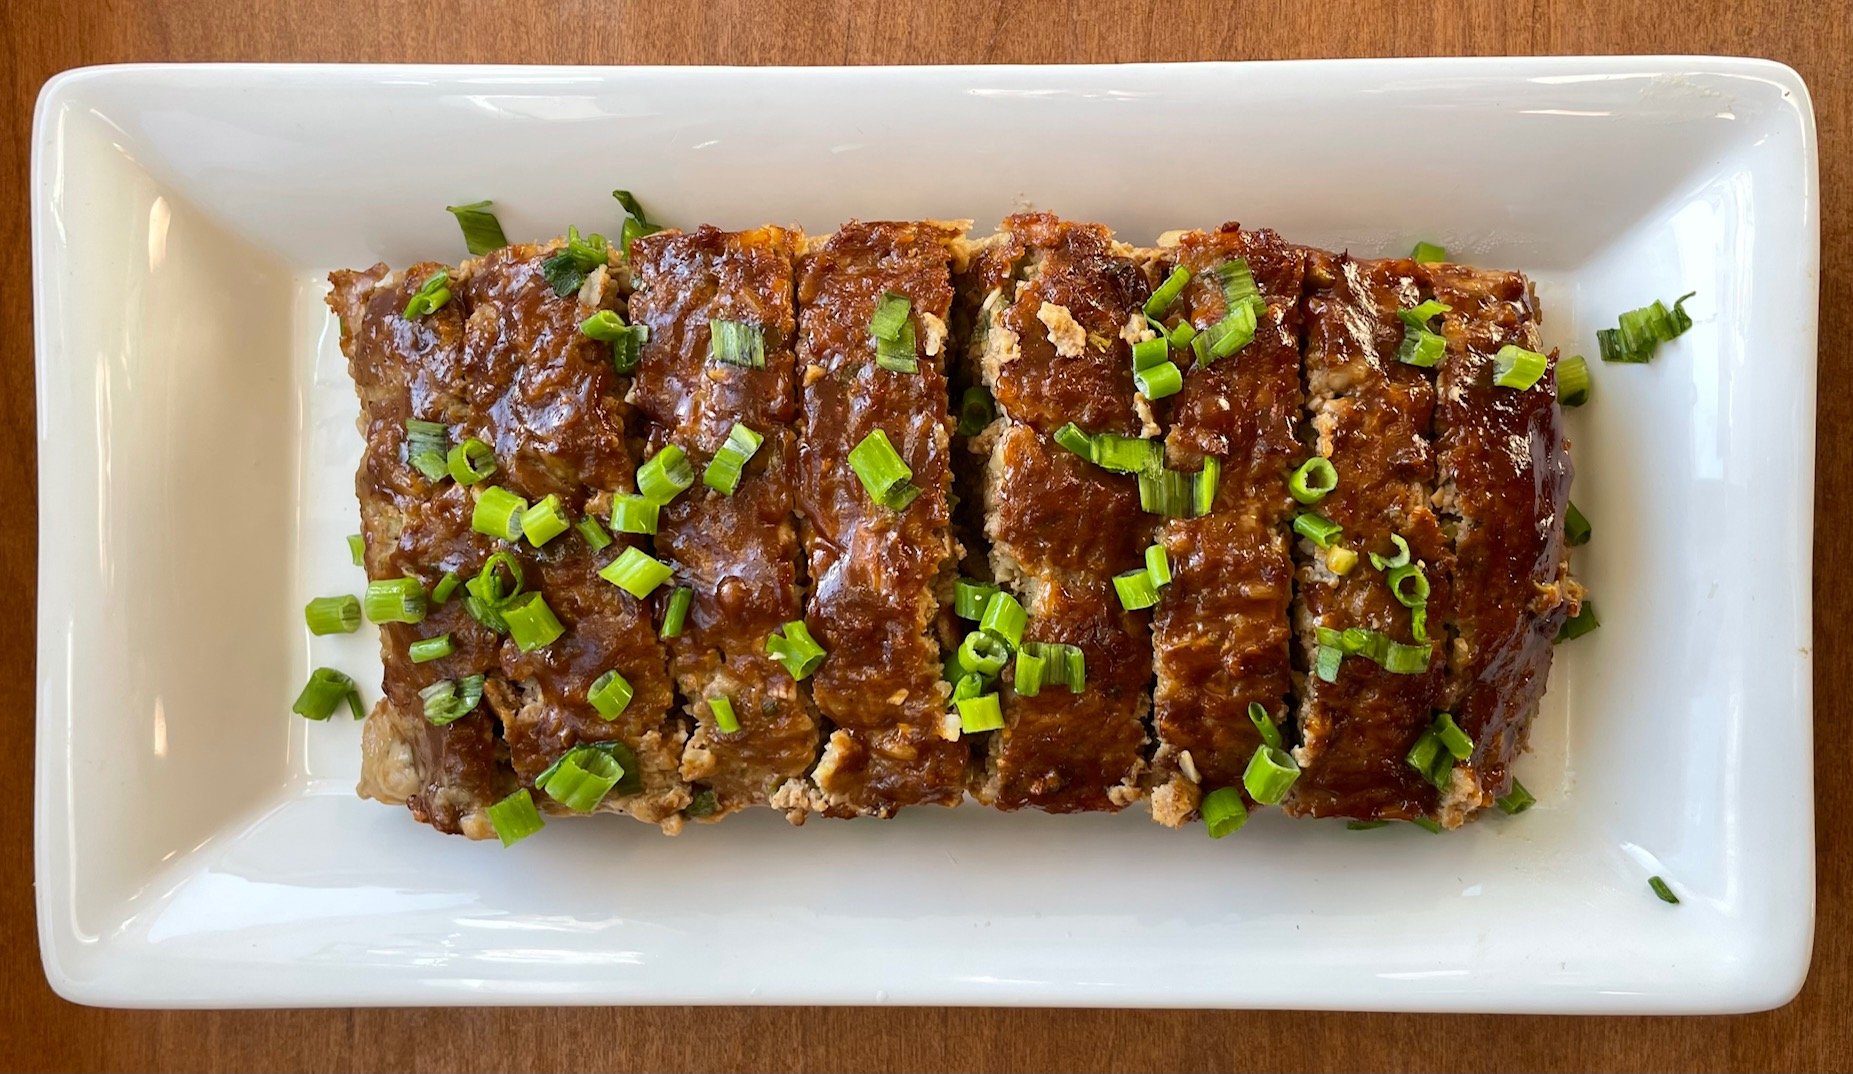 a platter of sliced meatloaf garnished with sliced green onions